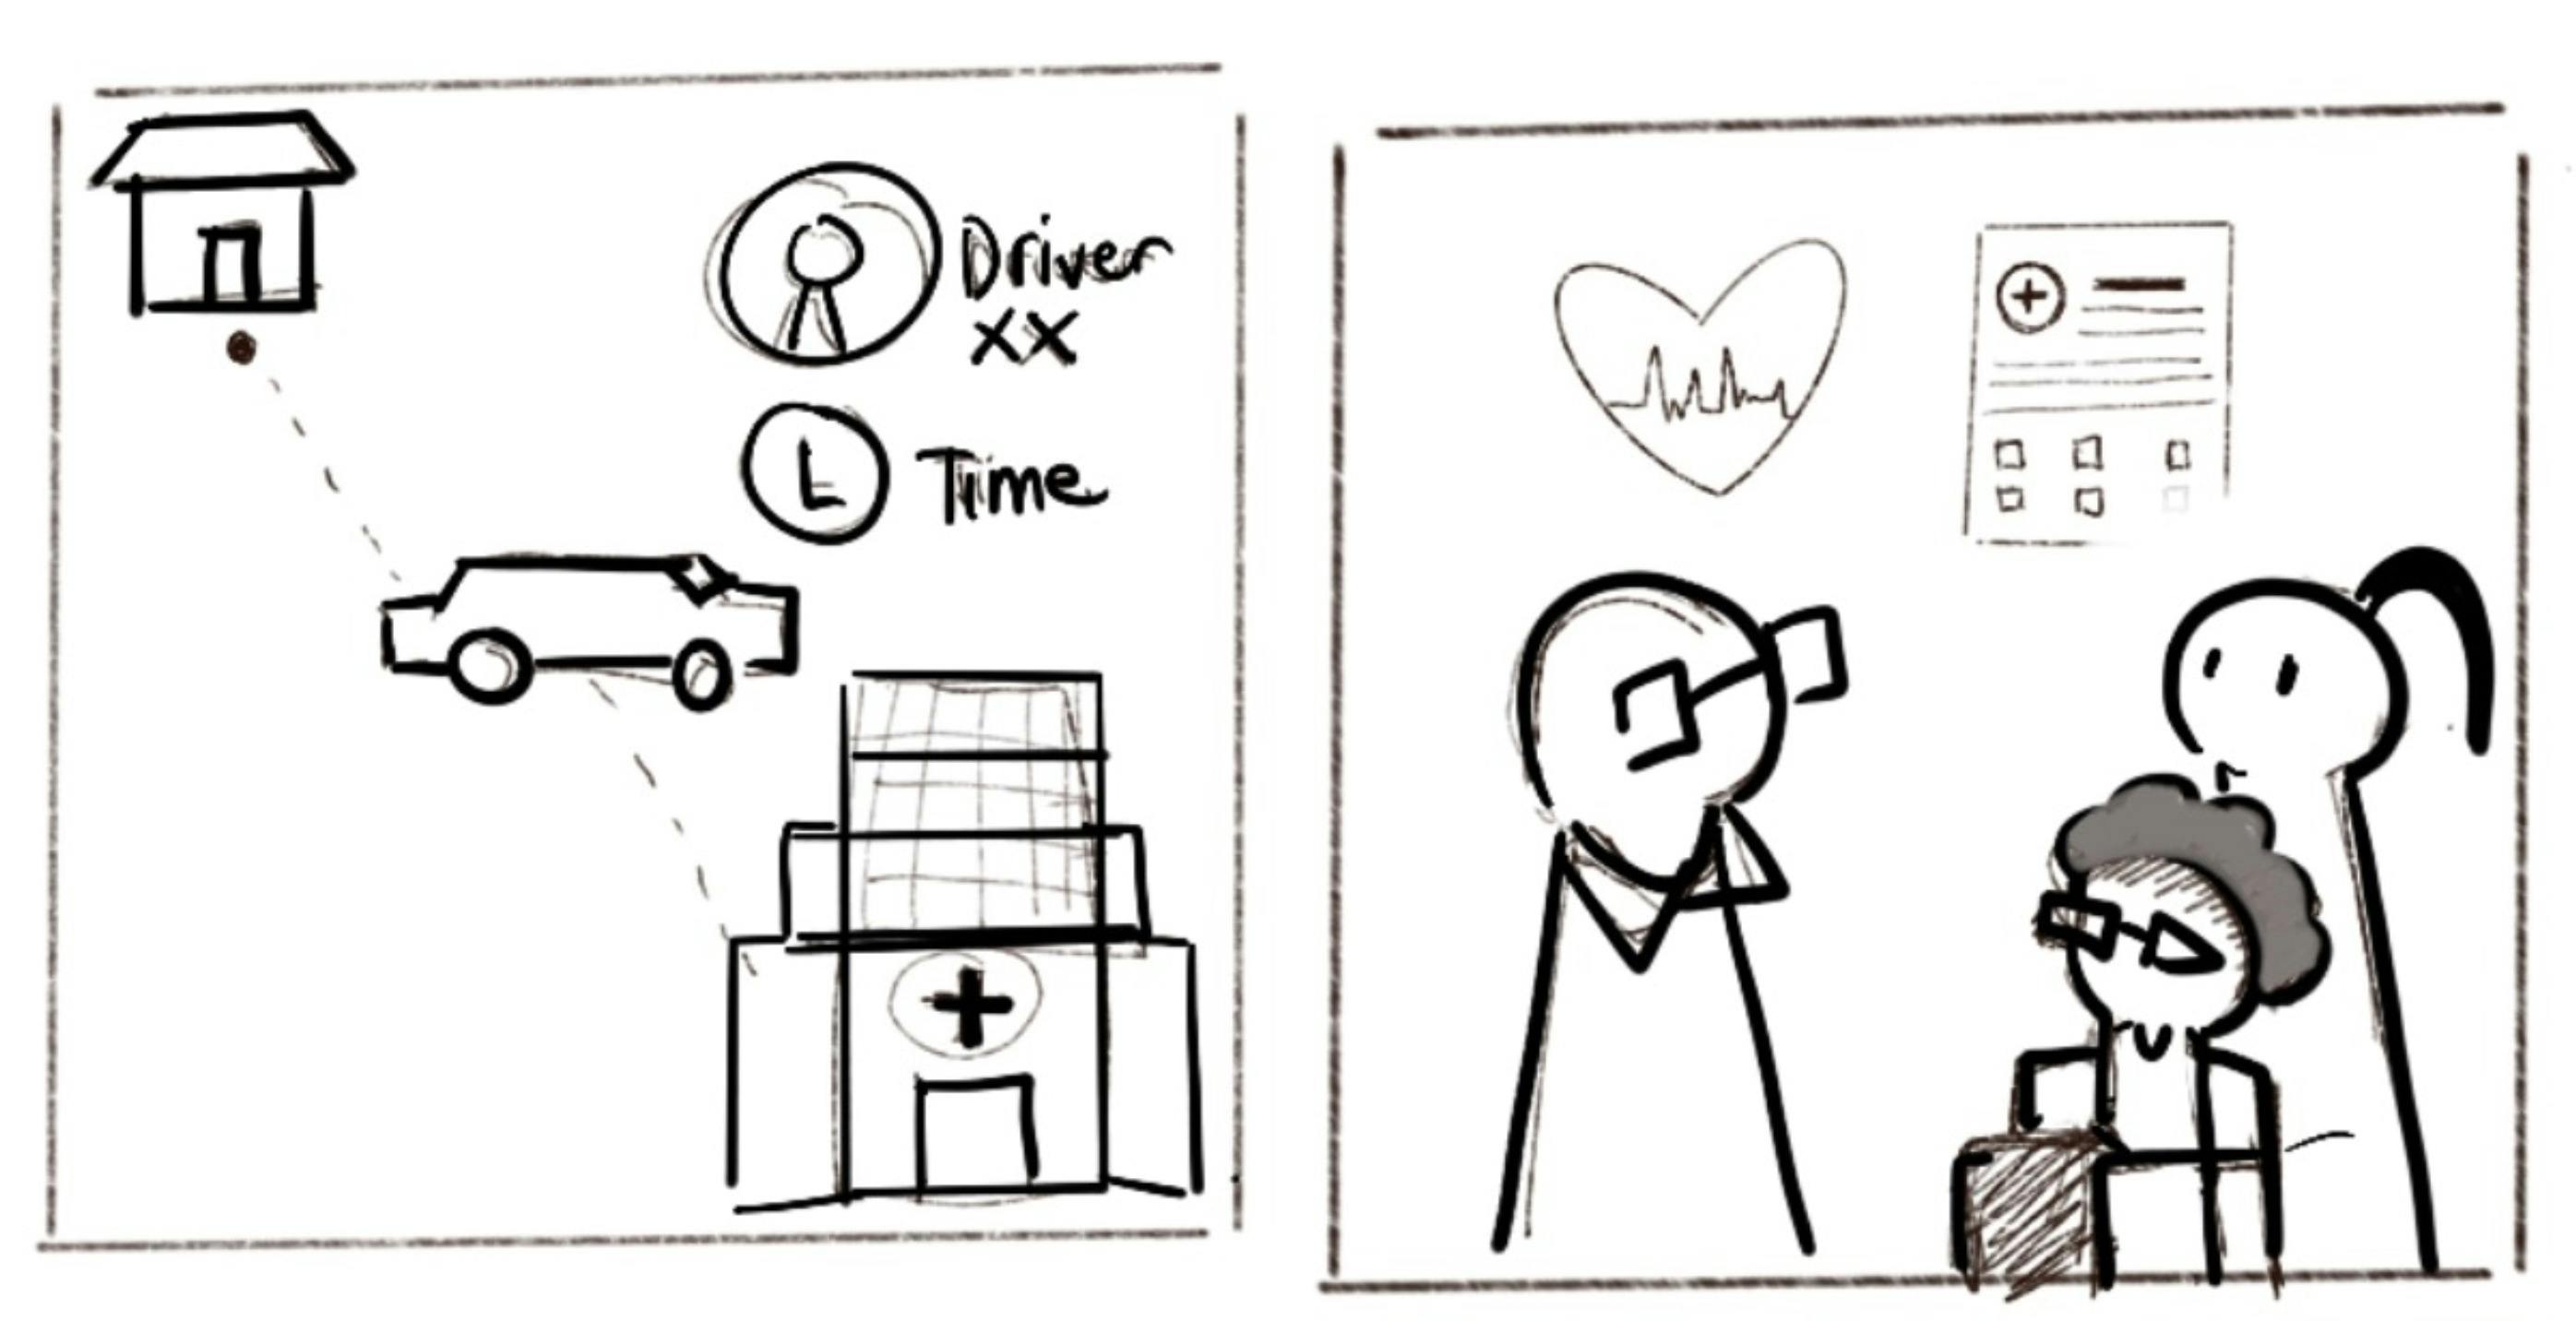 Storyboard sketches with frame 1 showing a house, car, and health center. Frame 2 shows a doctor facing 2 characters in an office, the old patient and young caregiver